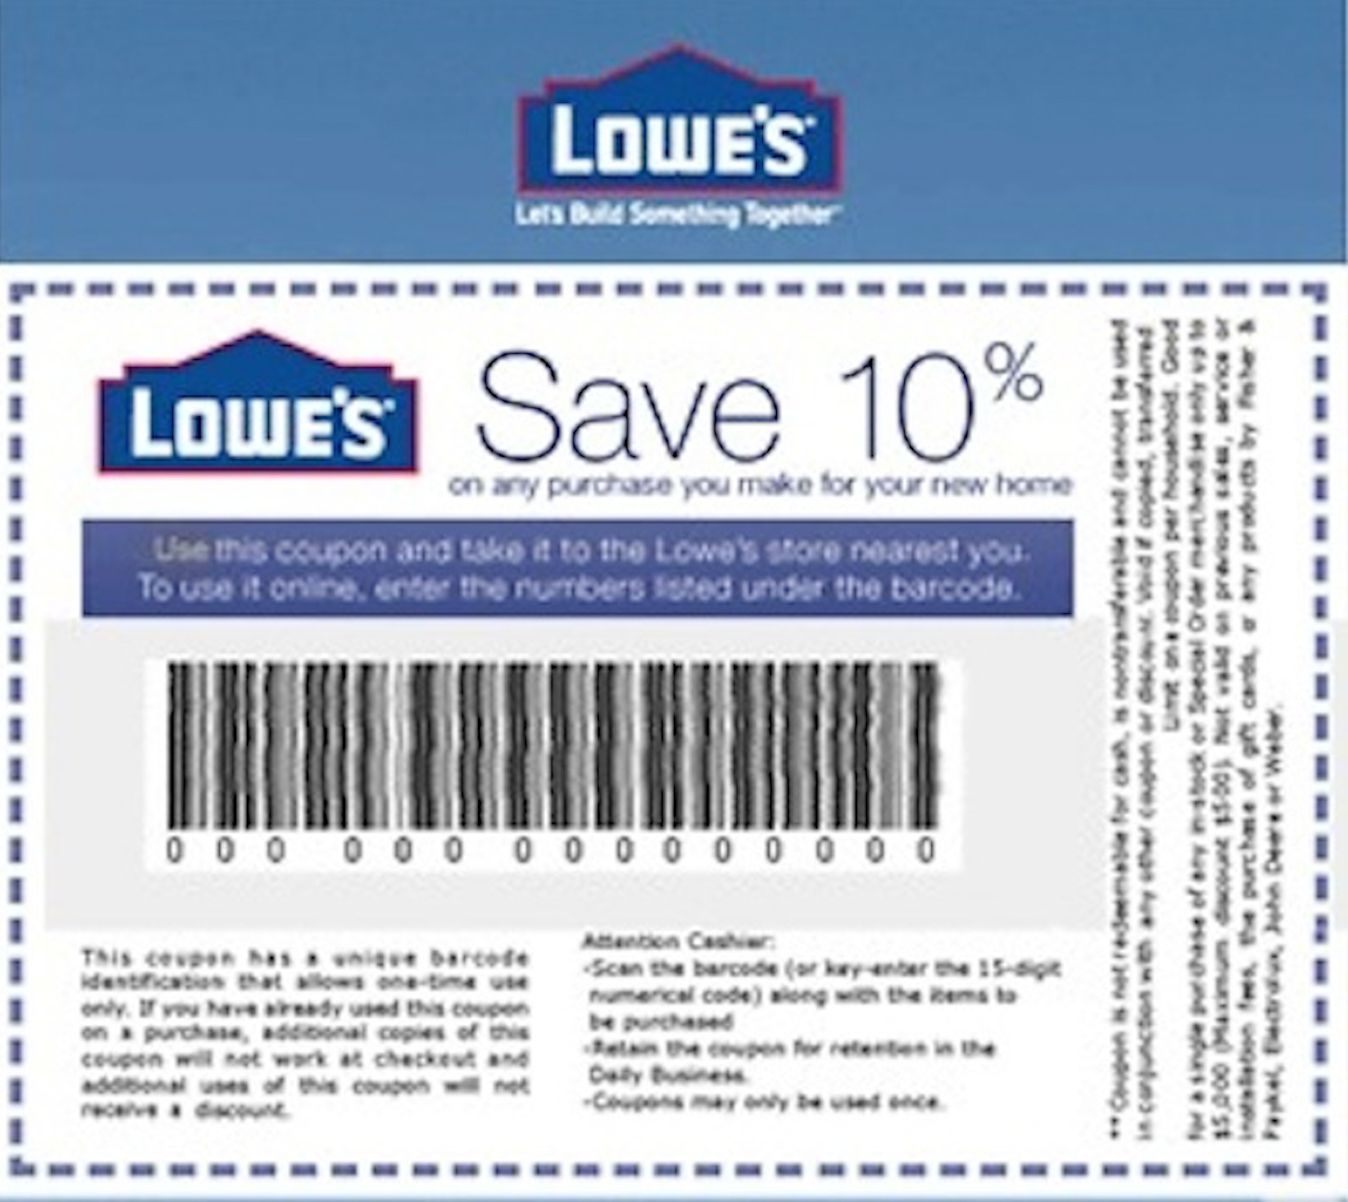 Coupons: Five (5X) Lowes 10% Off Printable-Coupons - Exp 5/31/17 - Free Printable Lowes Coupon 2014